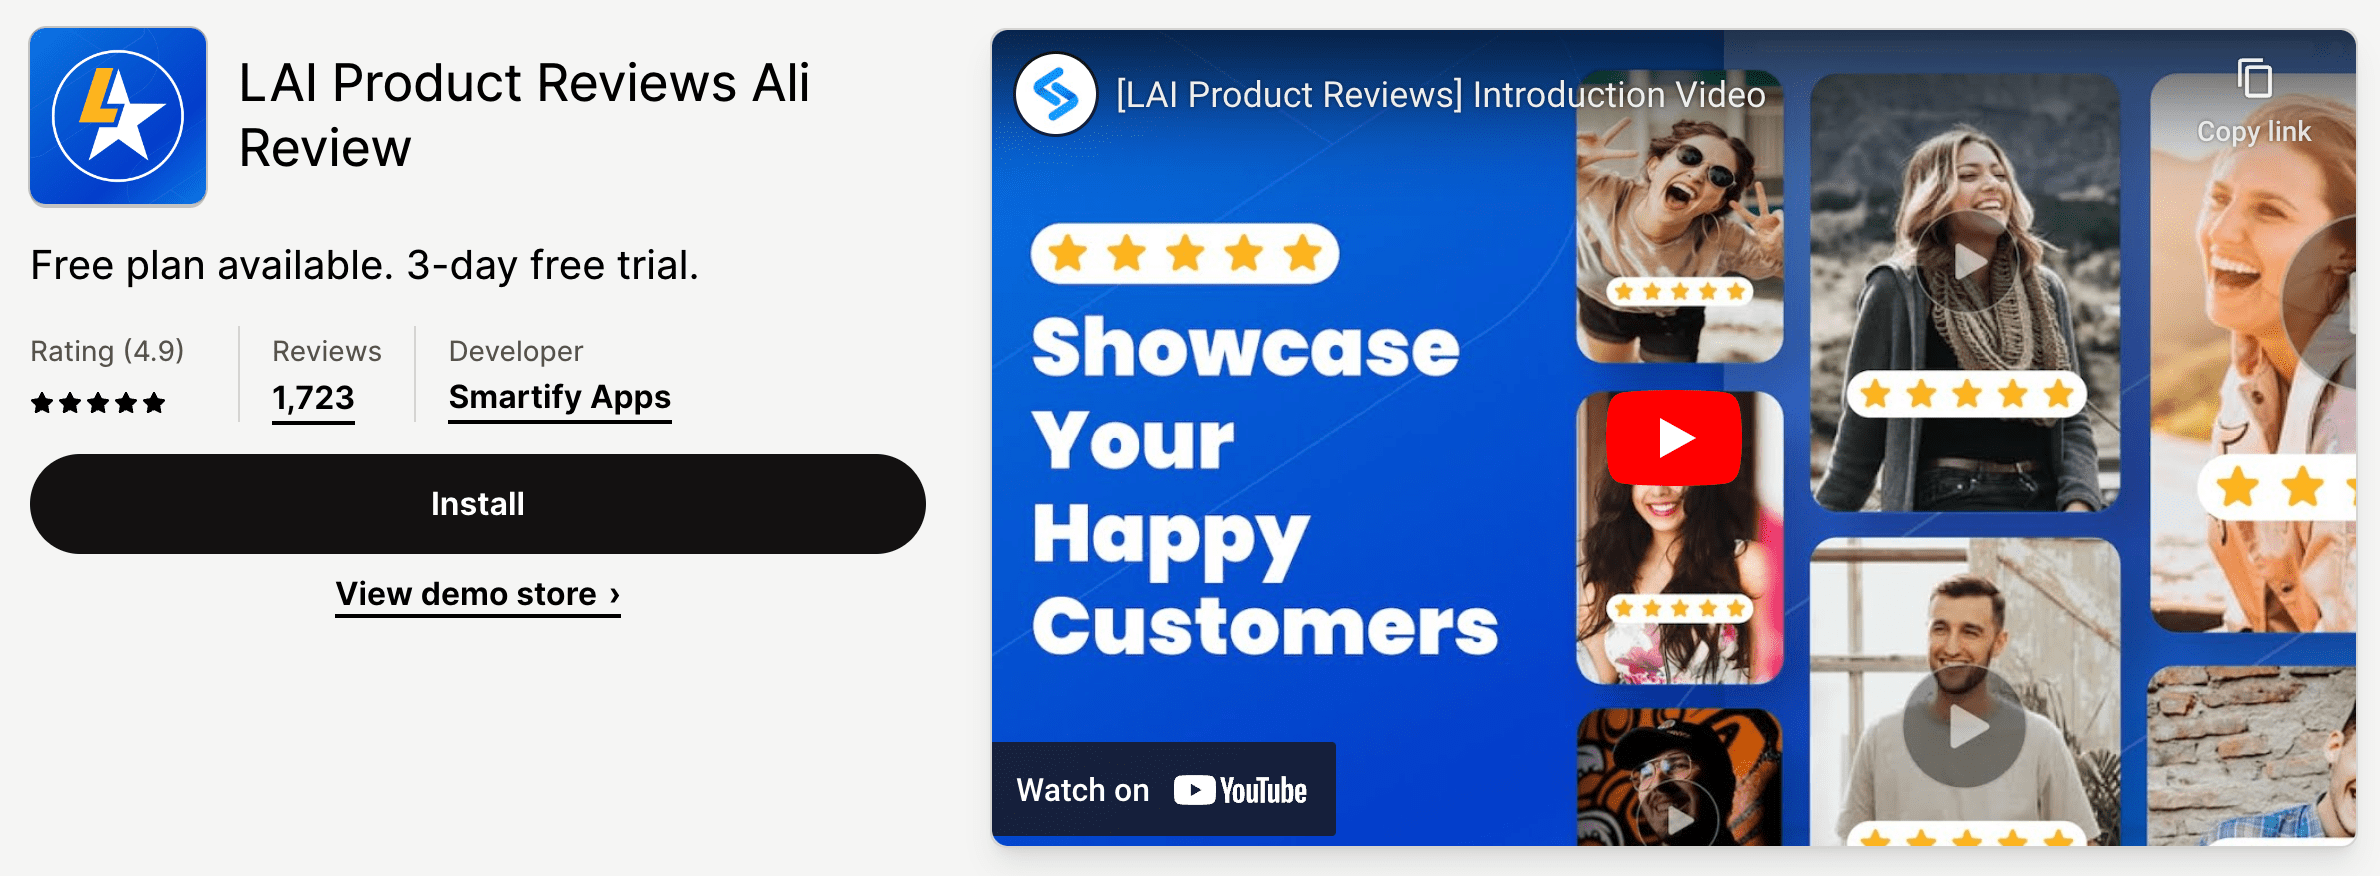 Install LAI Product Reviews app